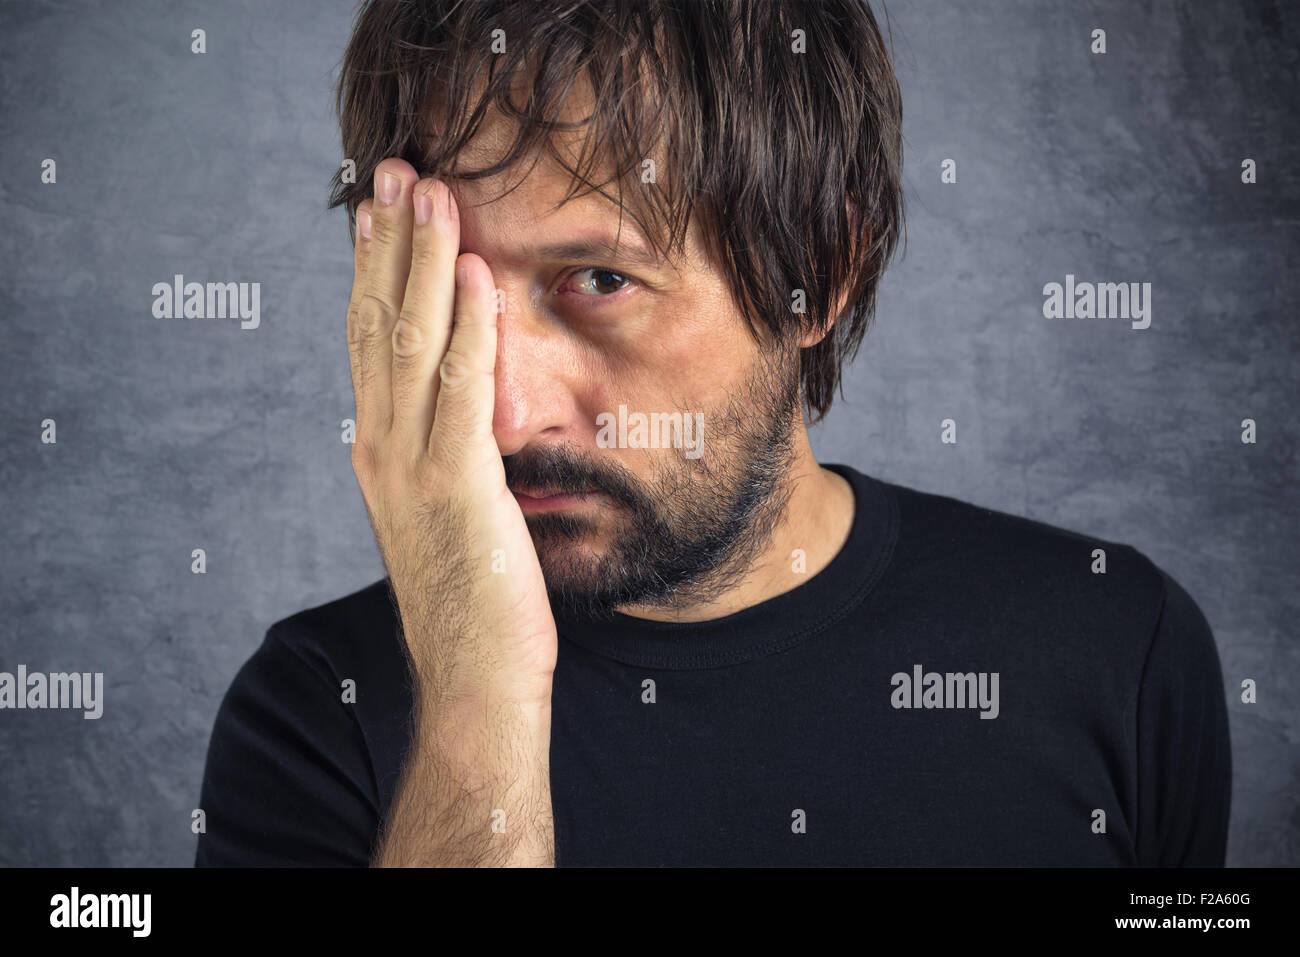 Portrait of tired exhausted man in trouble, problems in life Stock Photo